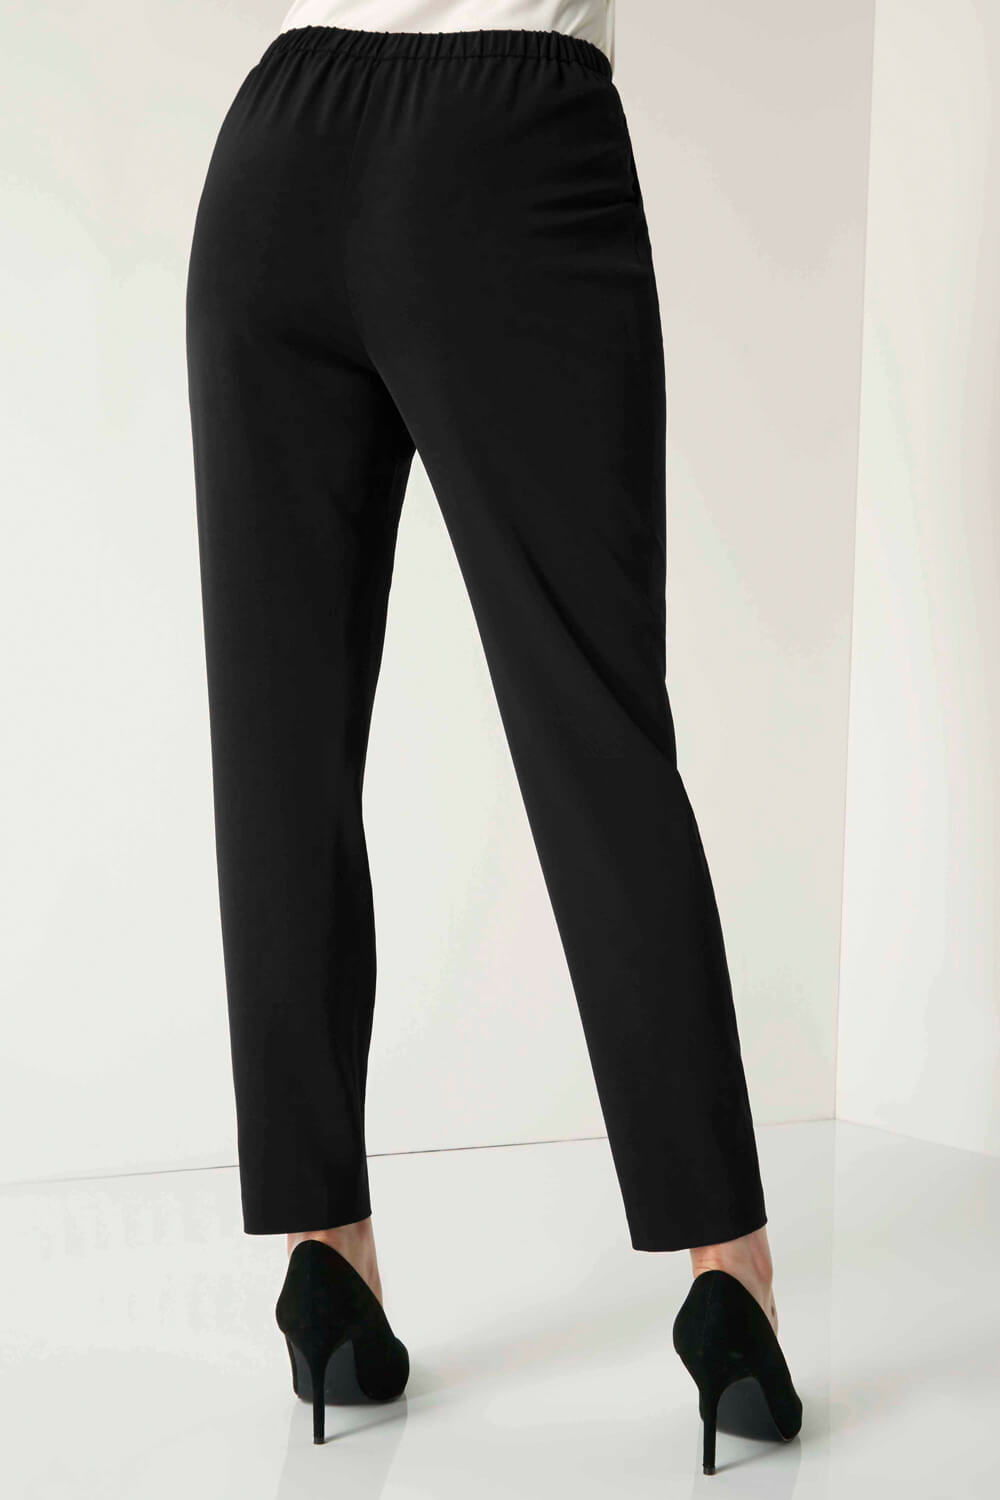 Black Jersey Stretch Harem Trousers, Image 2 of 3